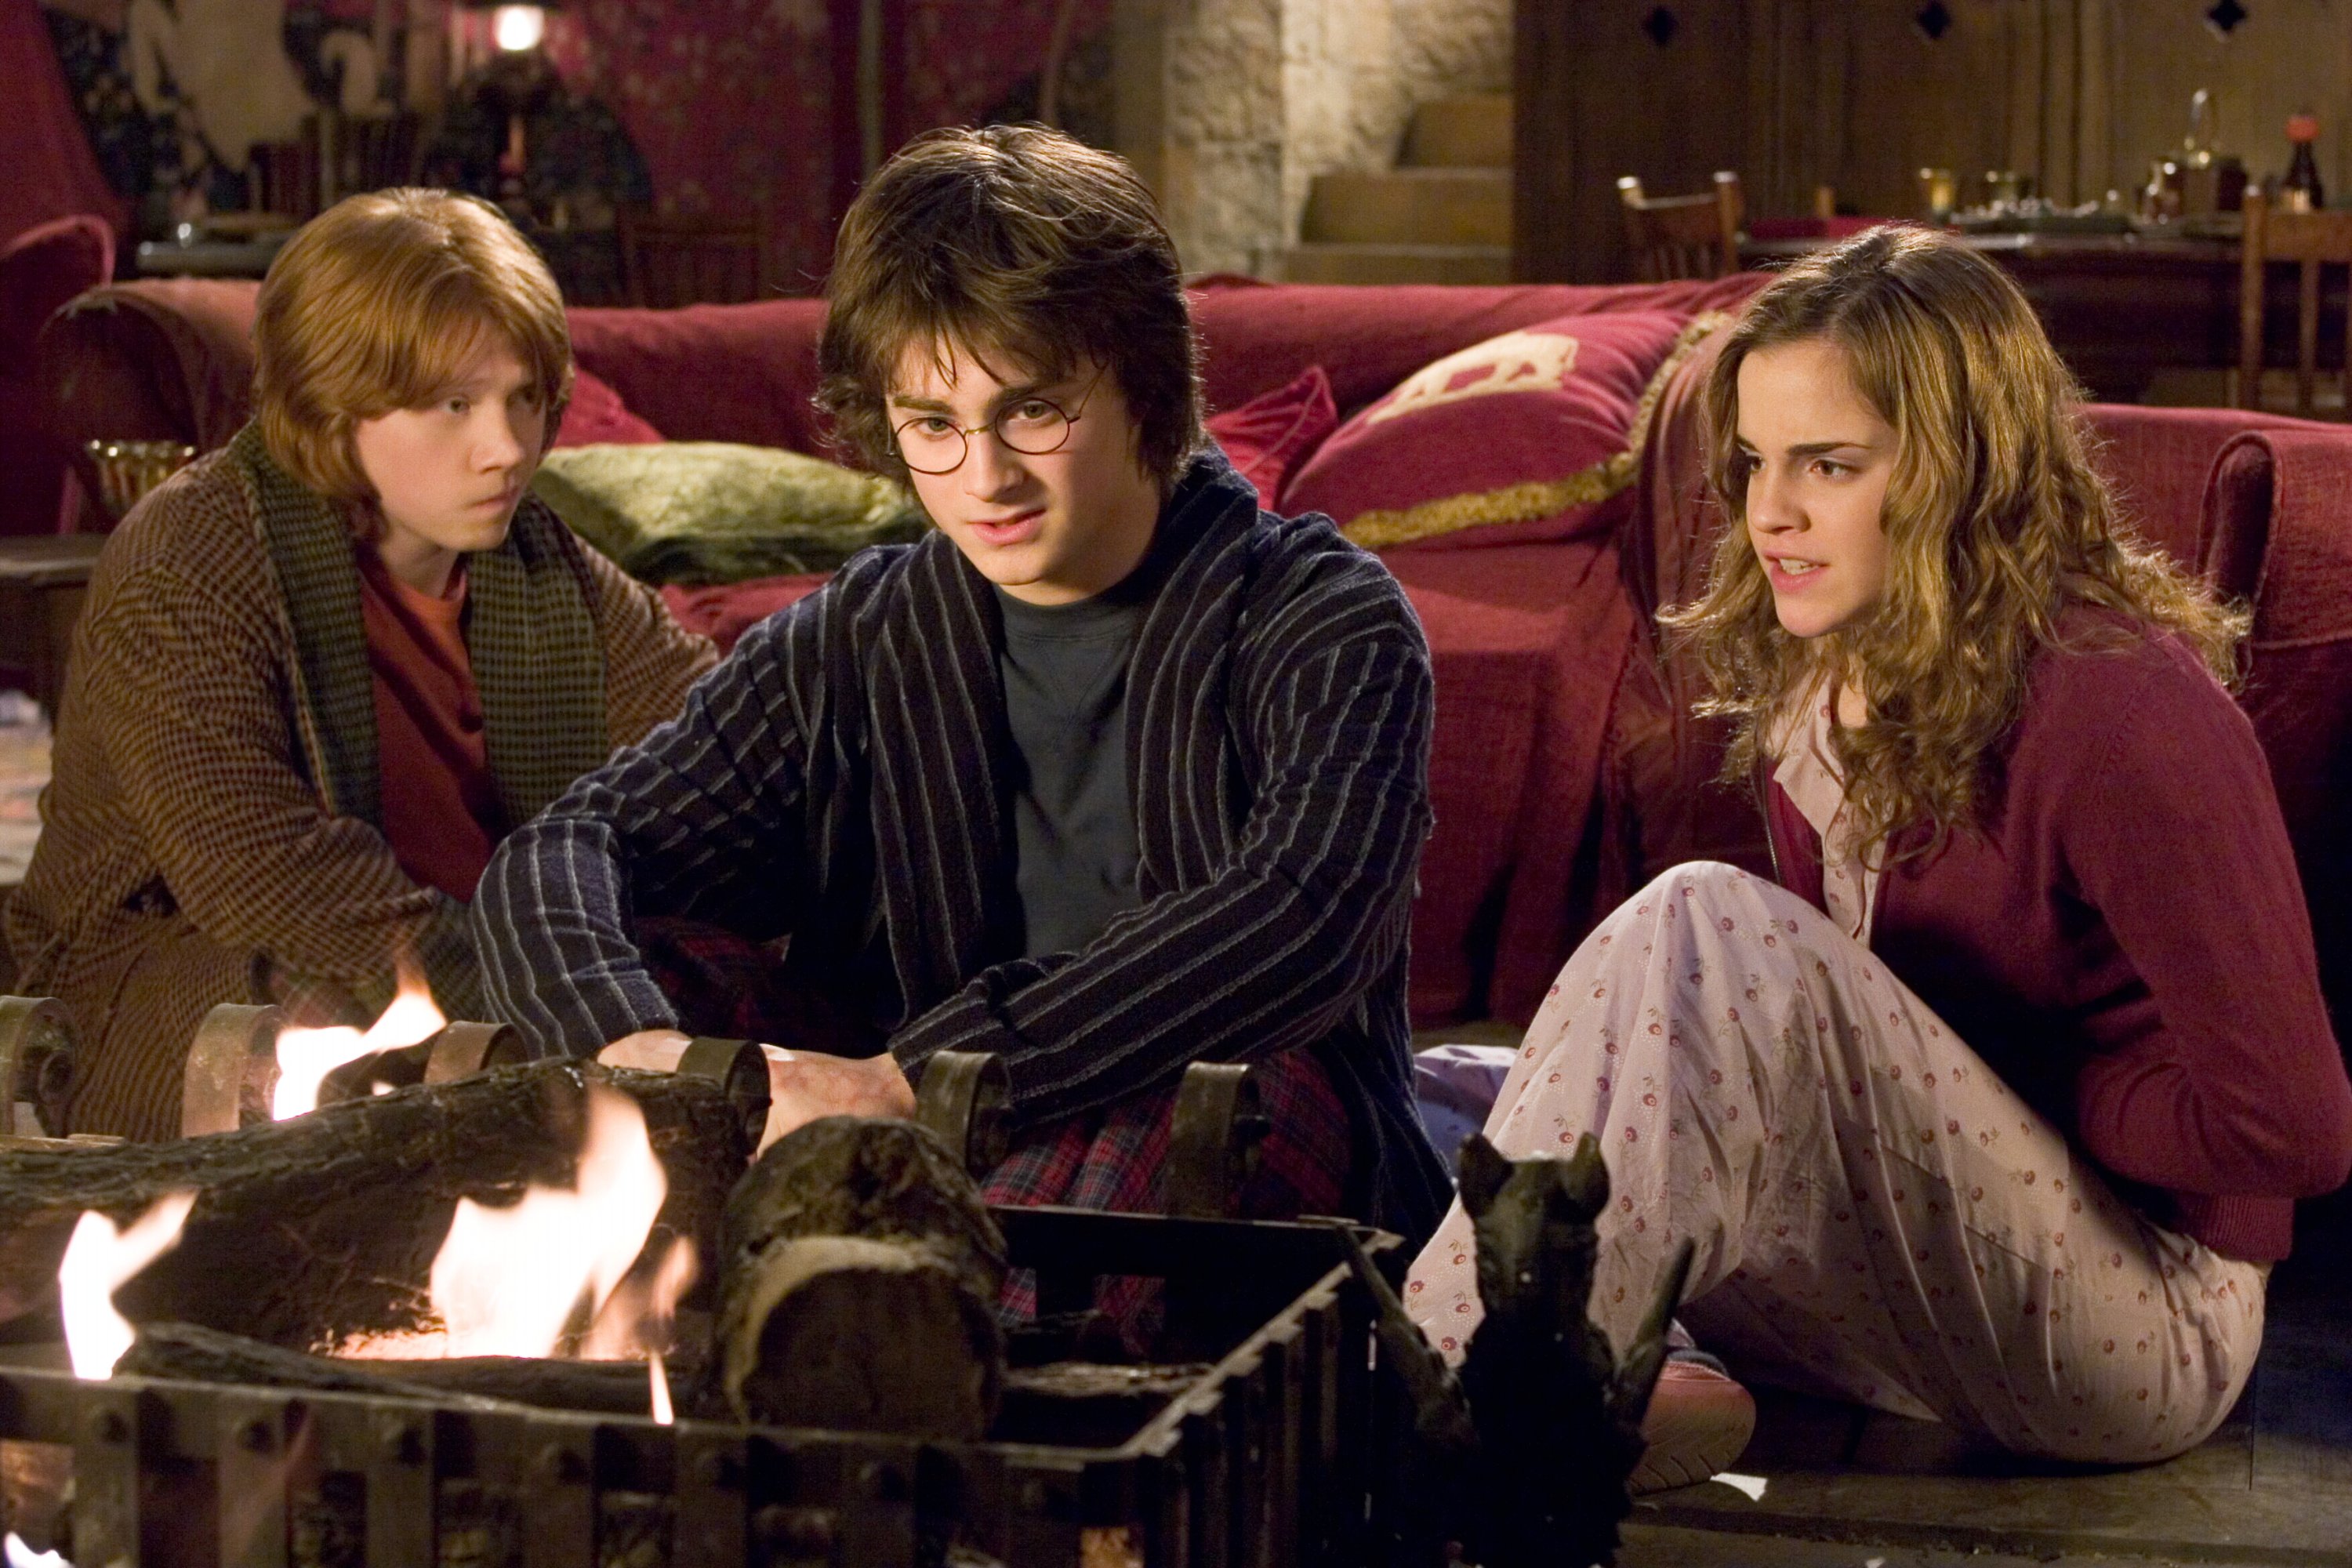 1920x1080 Background harry potter, movie, harry potter and the goblet of fire, daniel radcliffe, emma watson, hermione granger, ron weasley, rupert grint